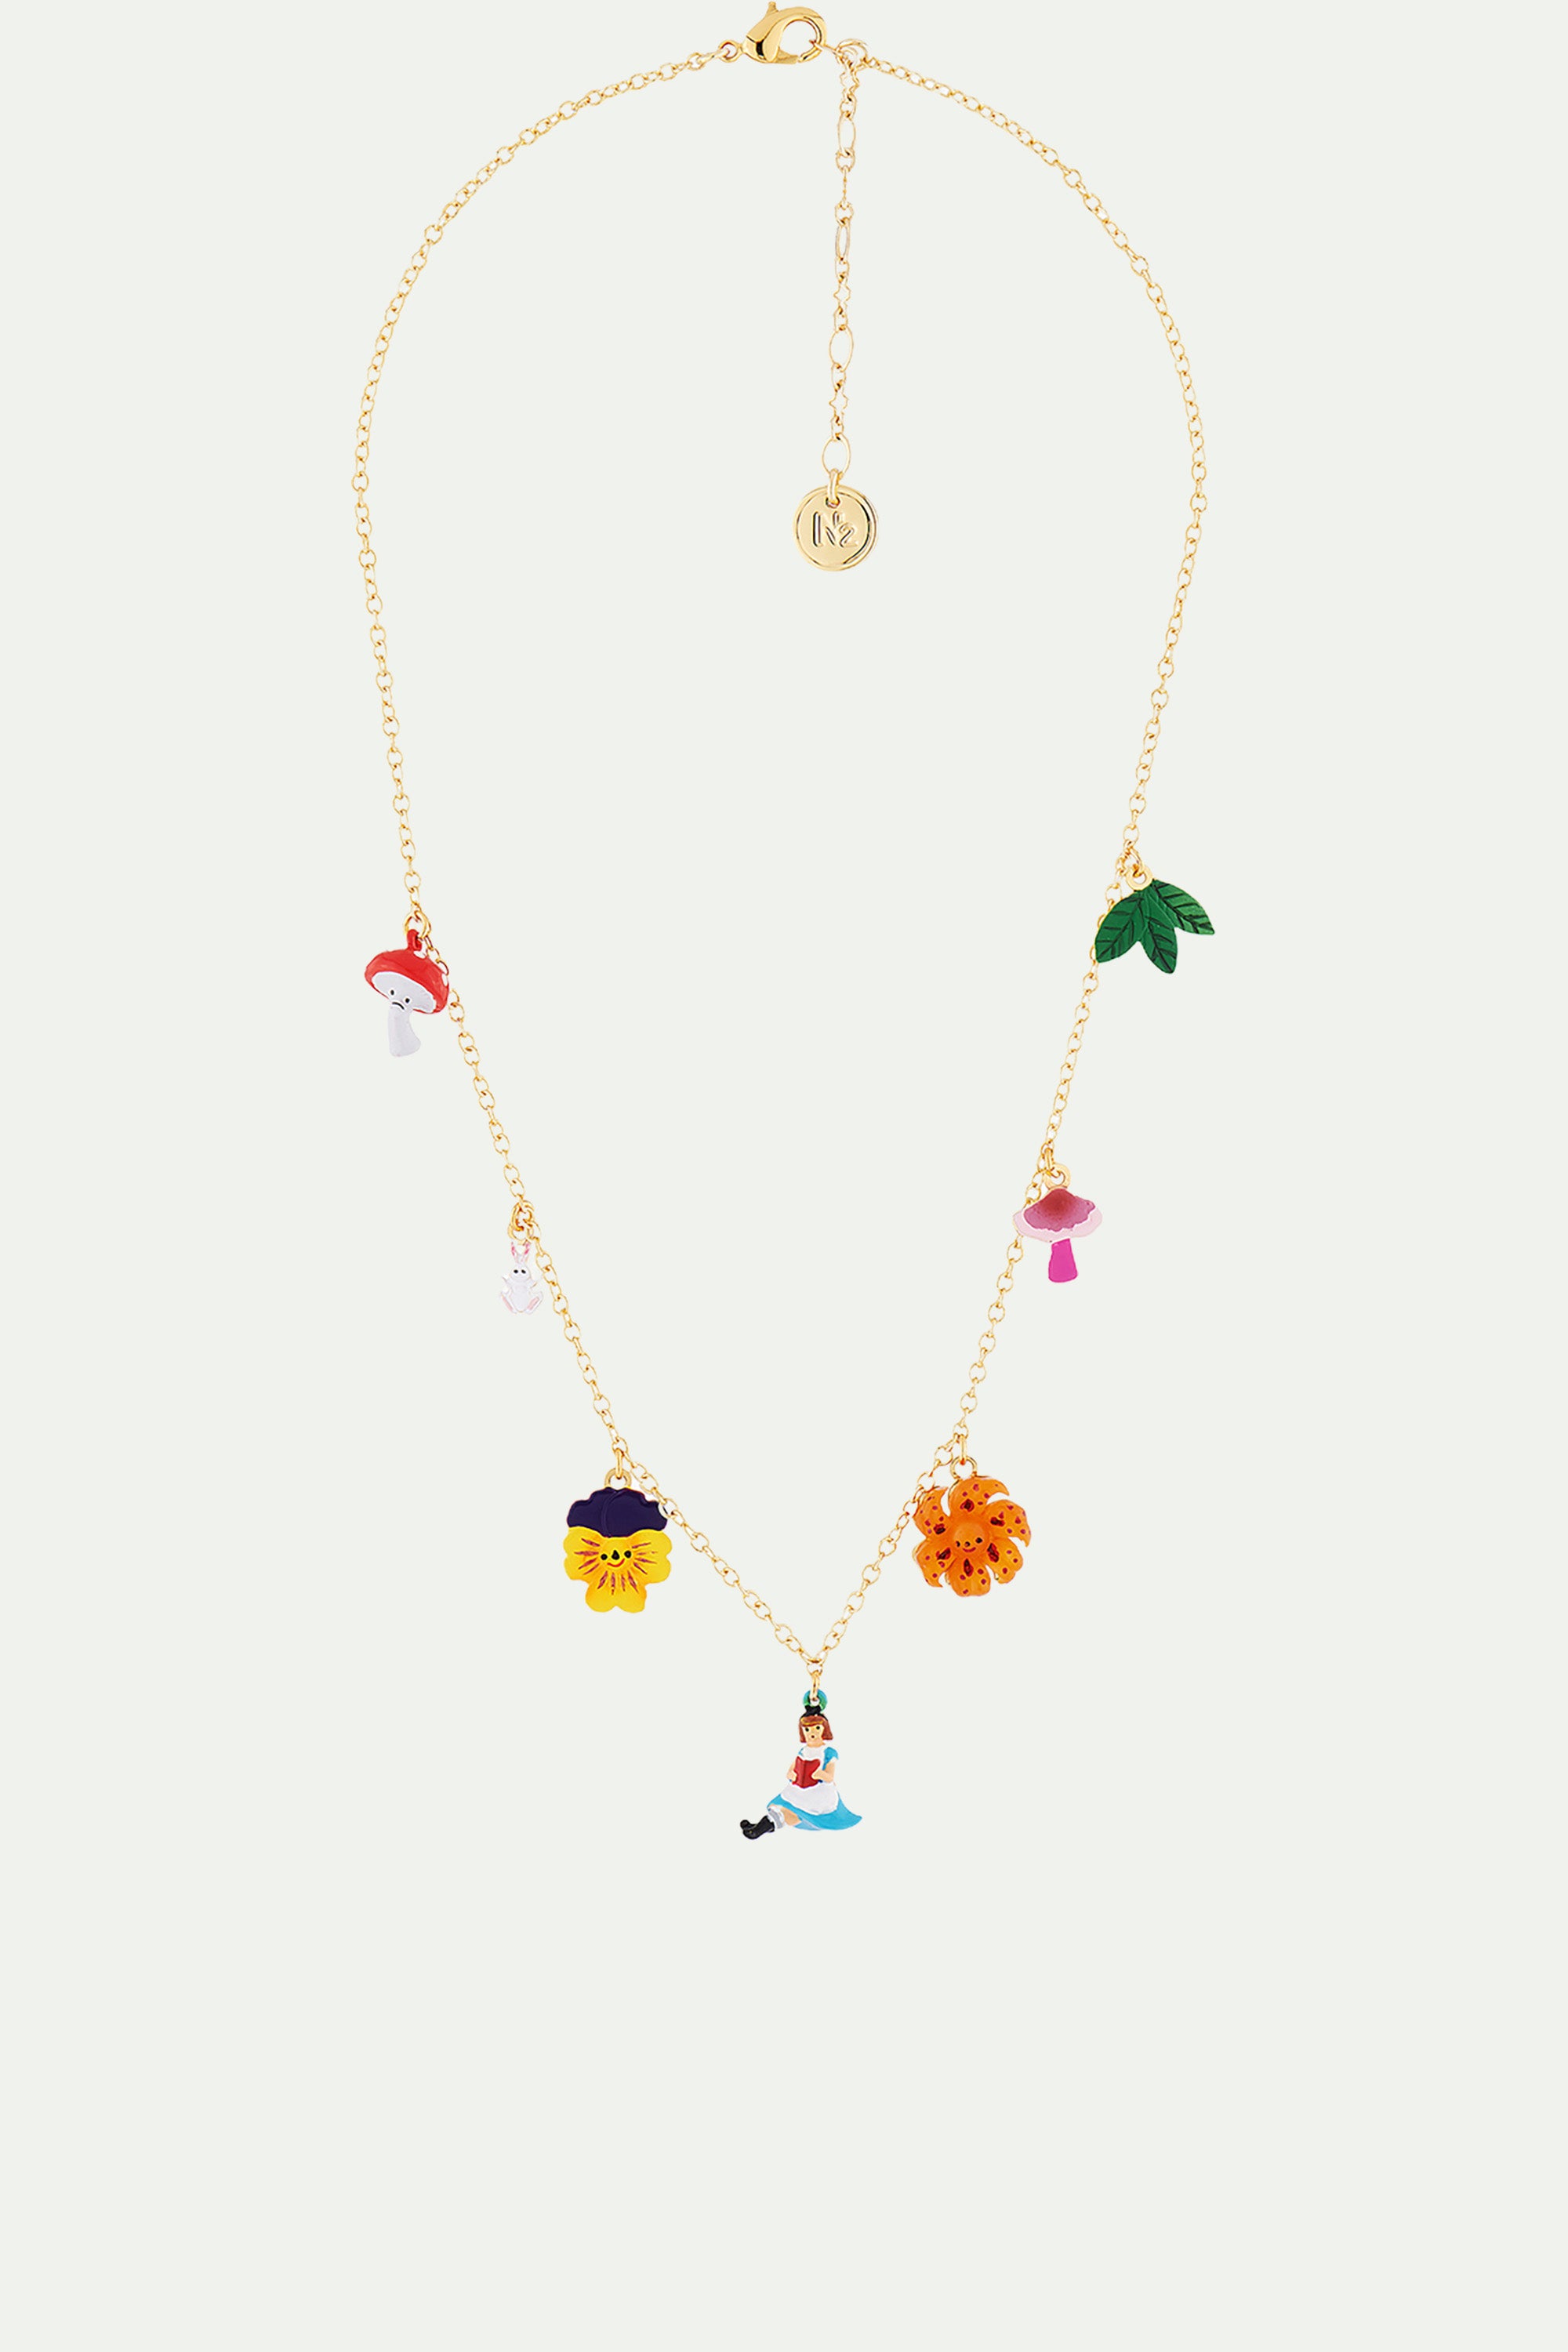 Alice, Flowers, Mushrooms and White Rabbit Thin Necklace